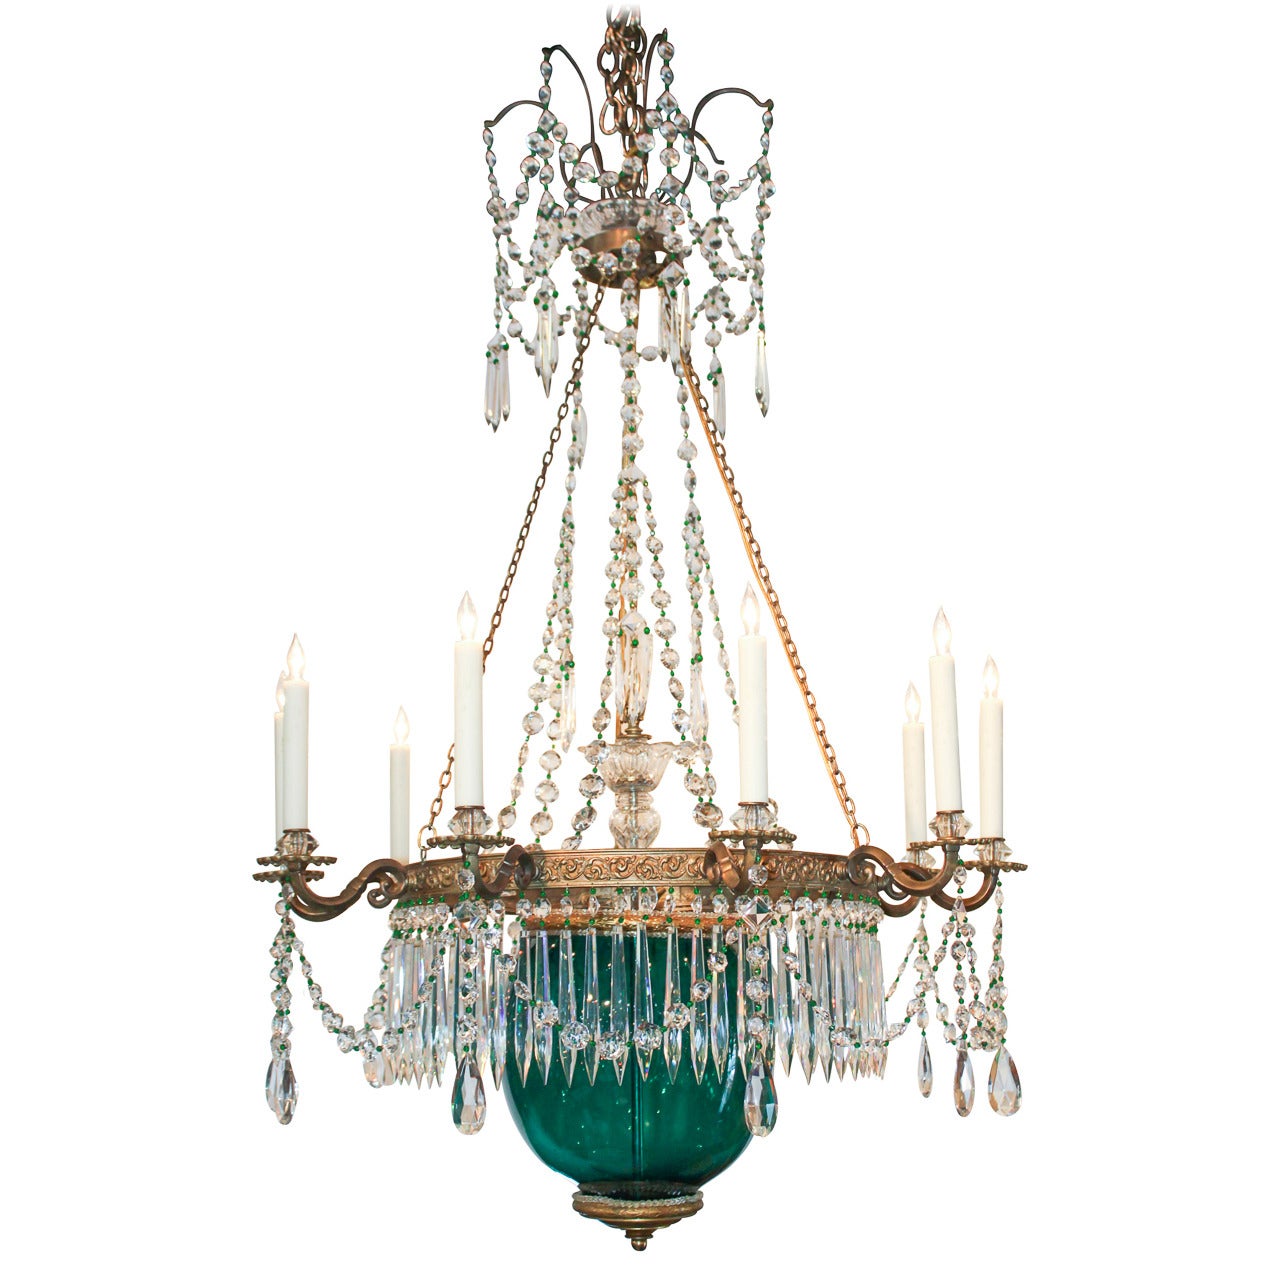 19th Century Russian Gilt Bronze and Colored Glass Chandelier